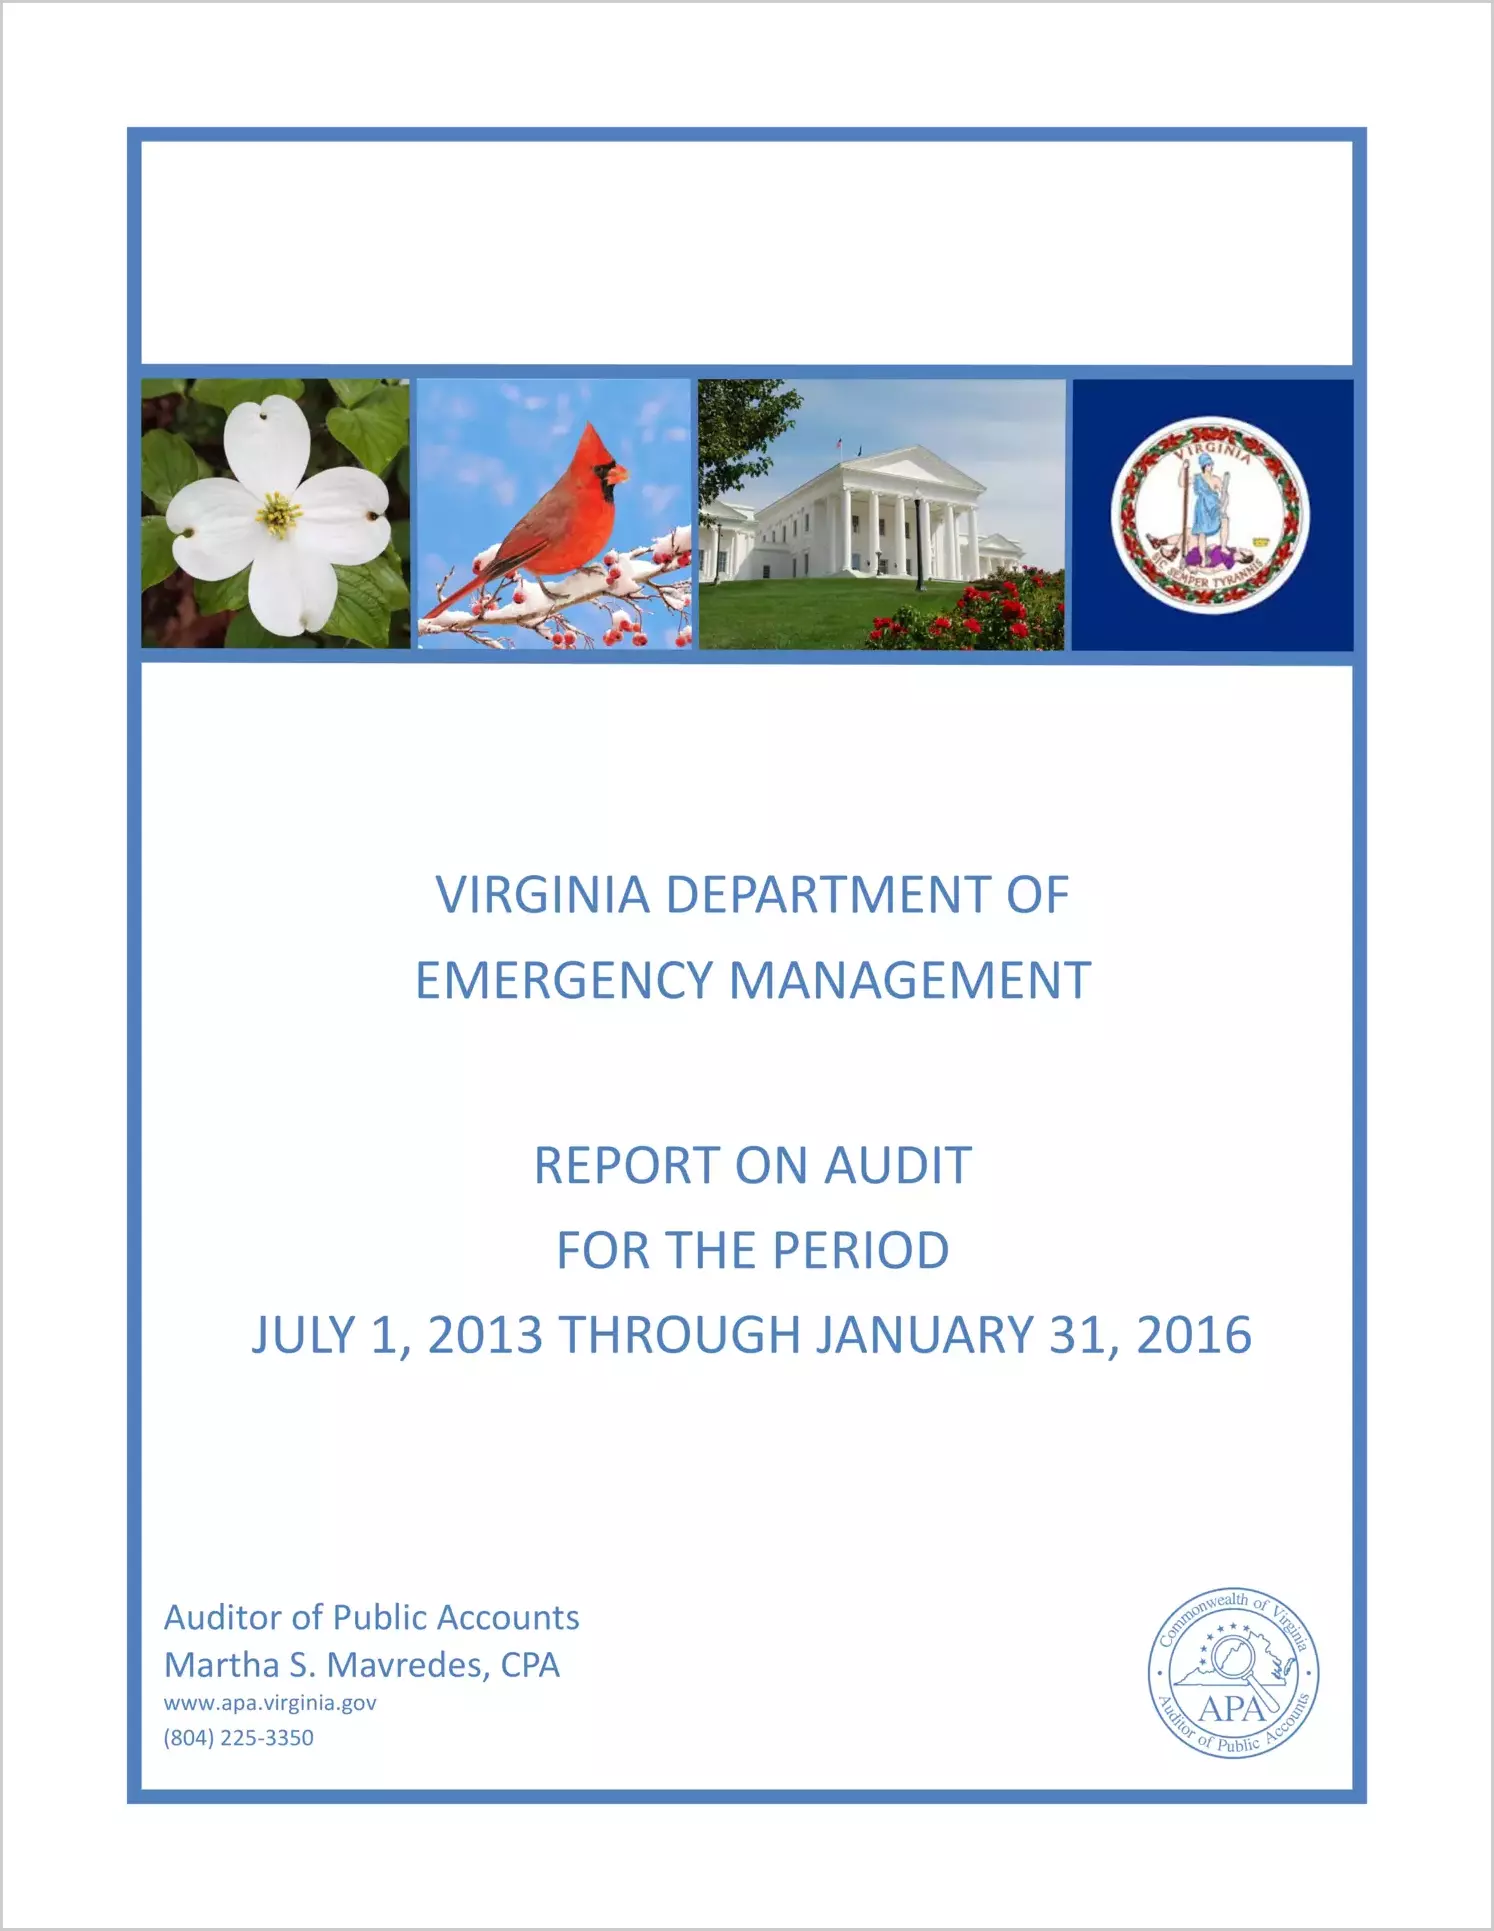 Virginia Department of Emergency Management report on audit for the period July 1, 2013 through January 31, 2016